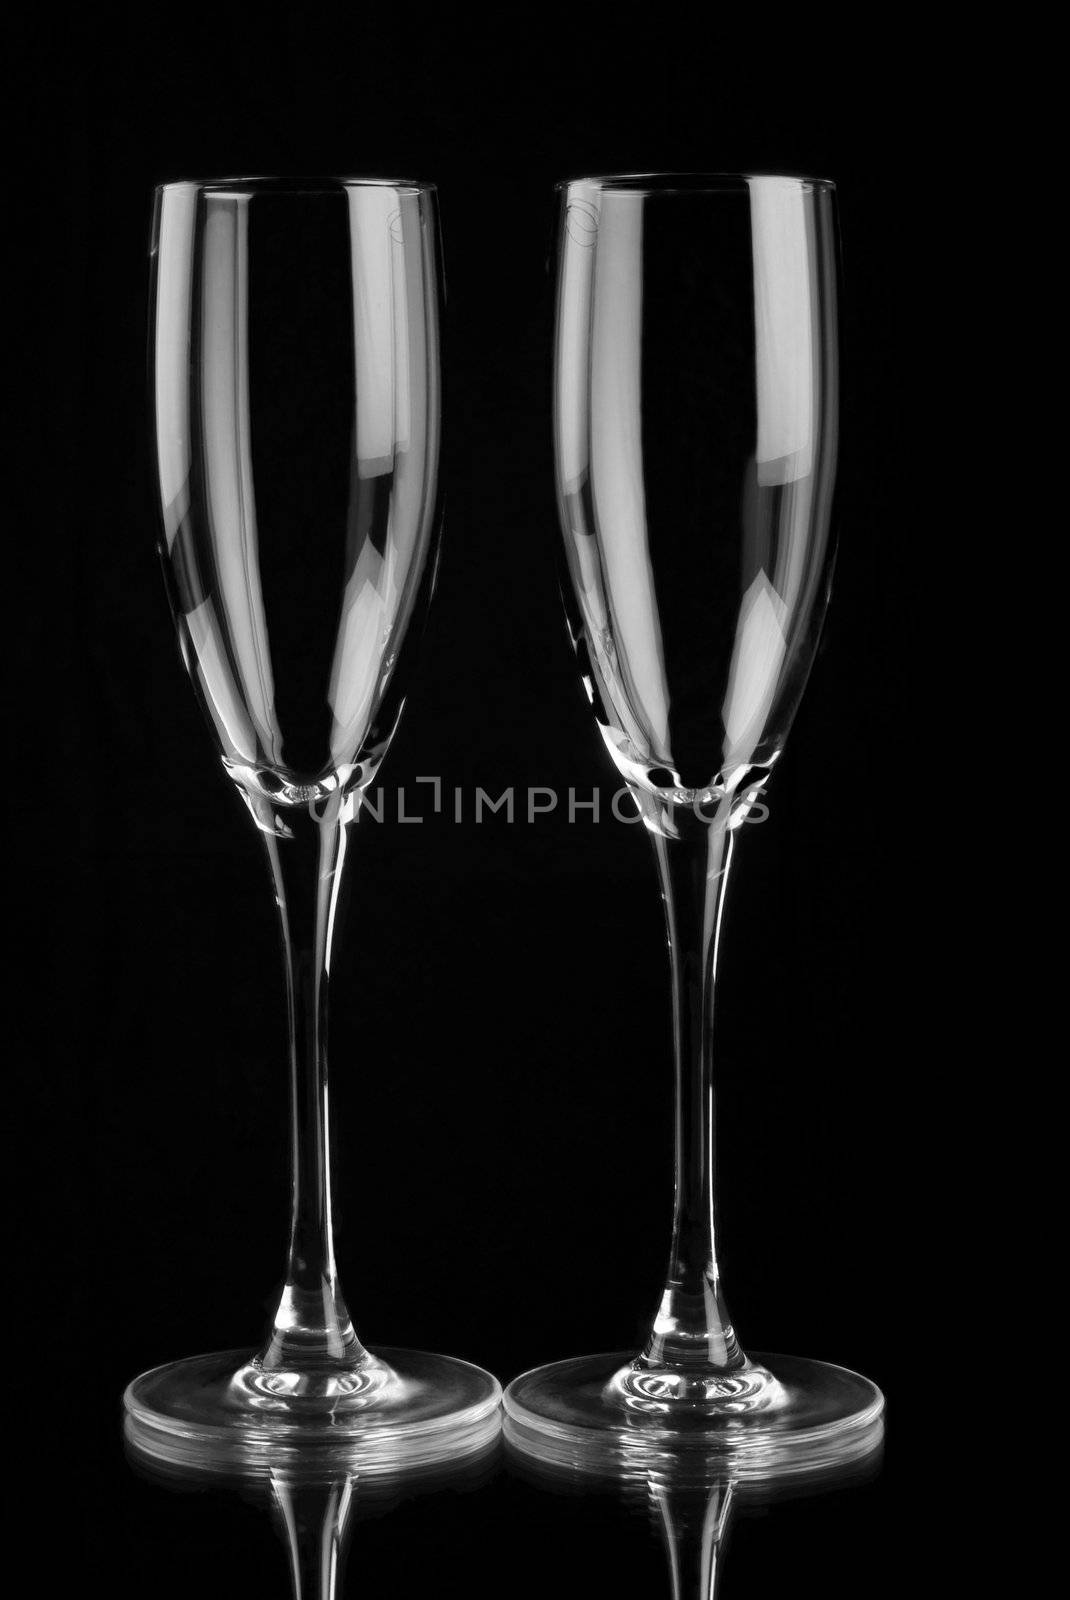 Two empty champagne flutes with mirror reflection on black bacground